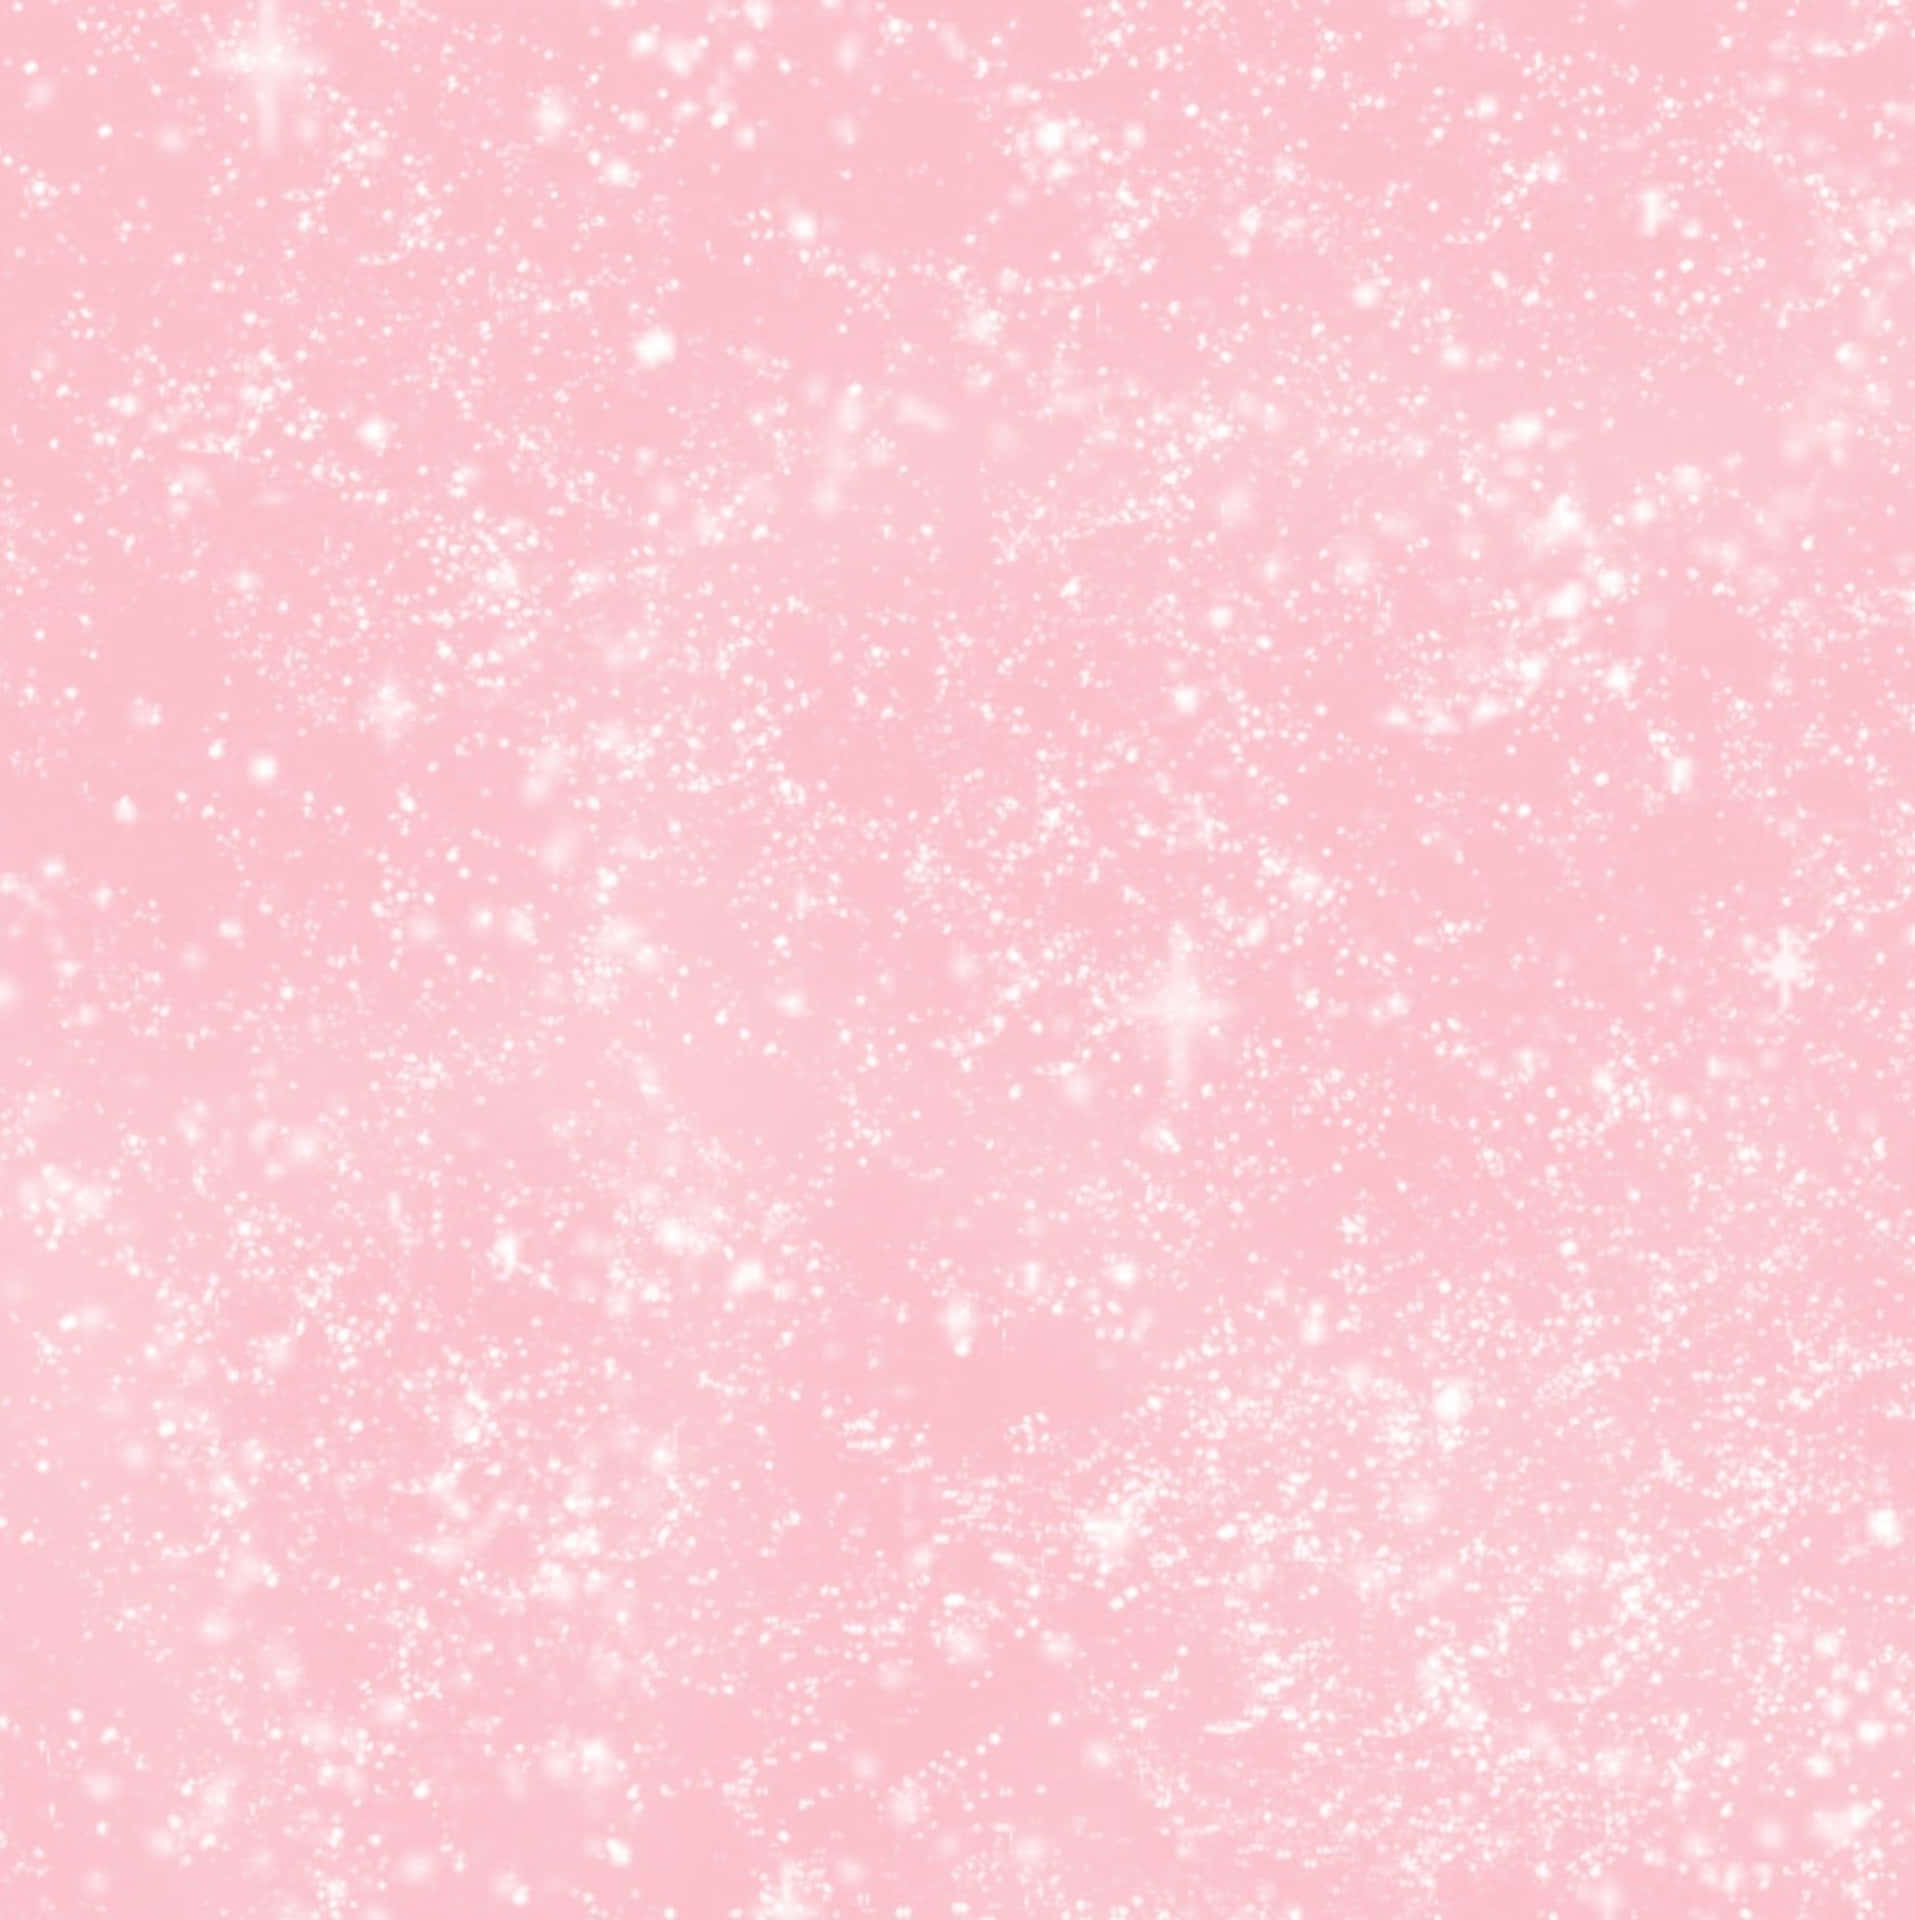 Check out this bright, beautiful Aesthetic Baby Pink wallpaper! Wallpaper